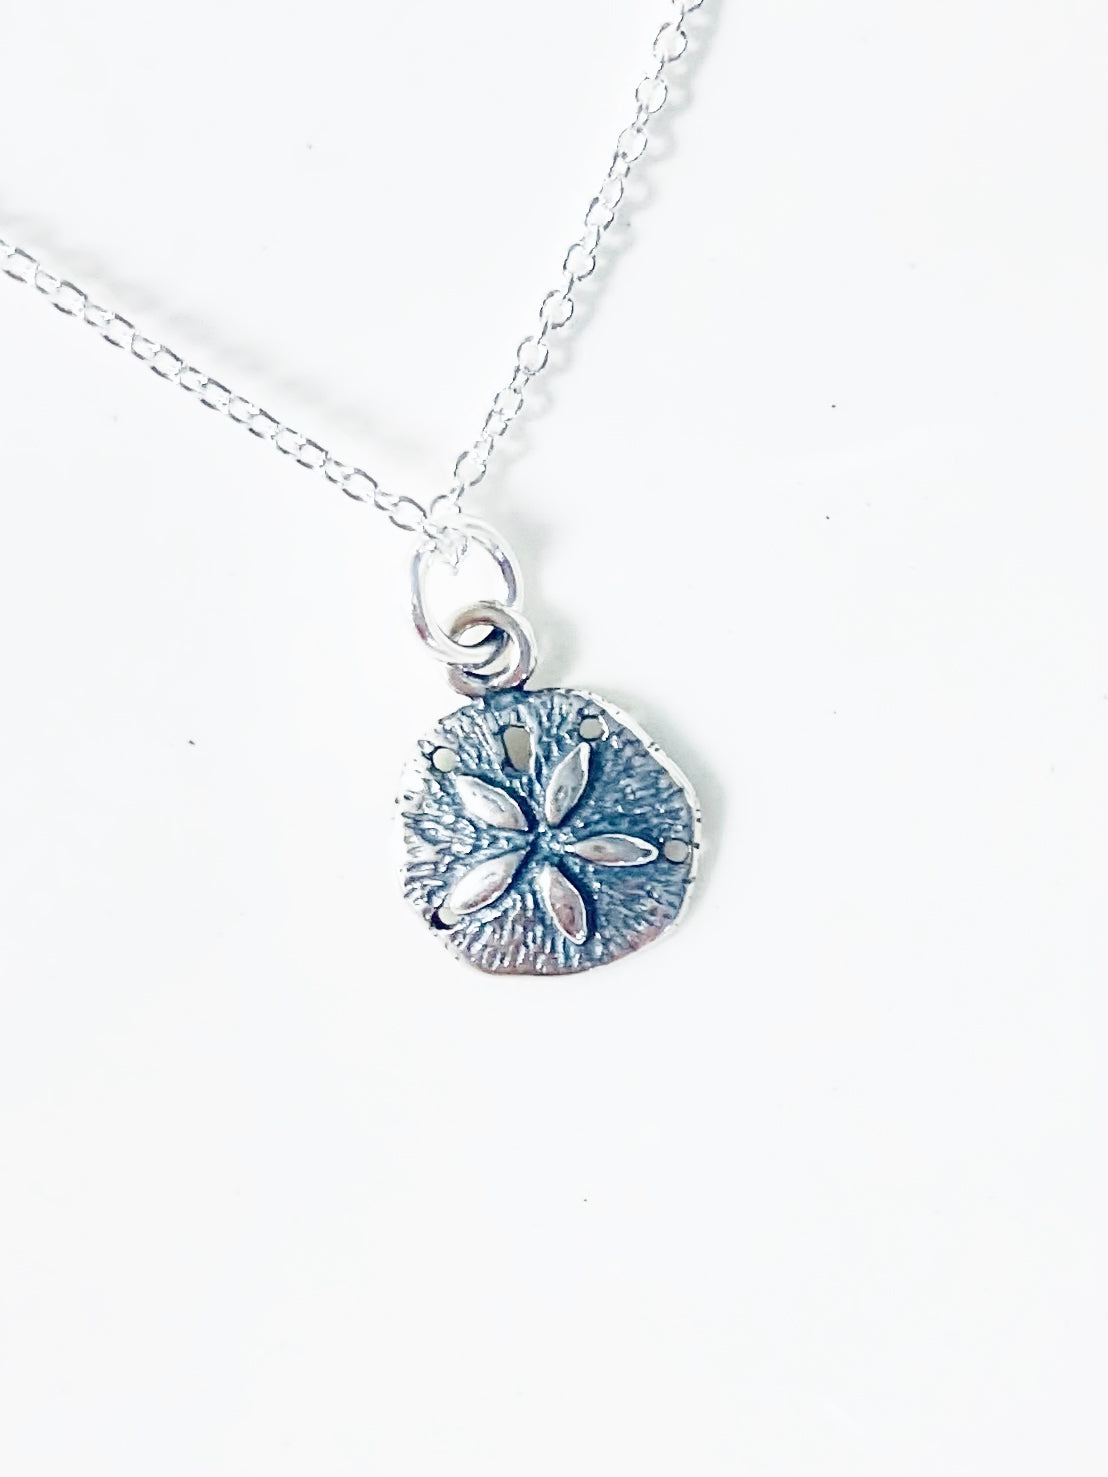 Sand Dollar Pendant Necklace - 925 Sterling Silver - Hammered Texture Beach  NEW | eBay